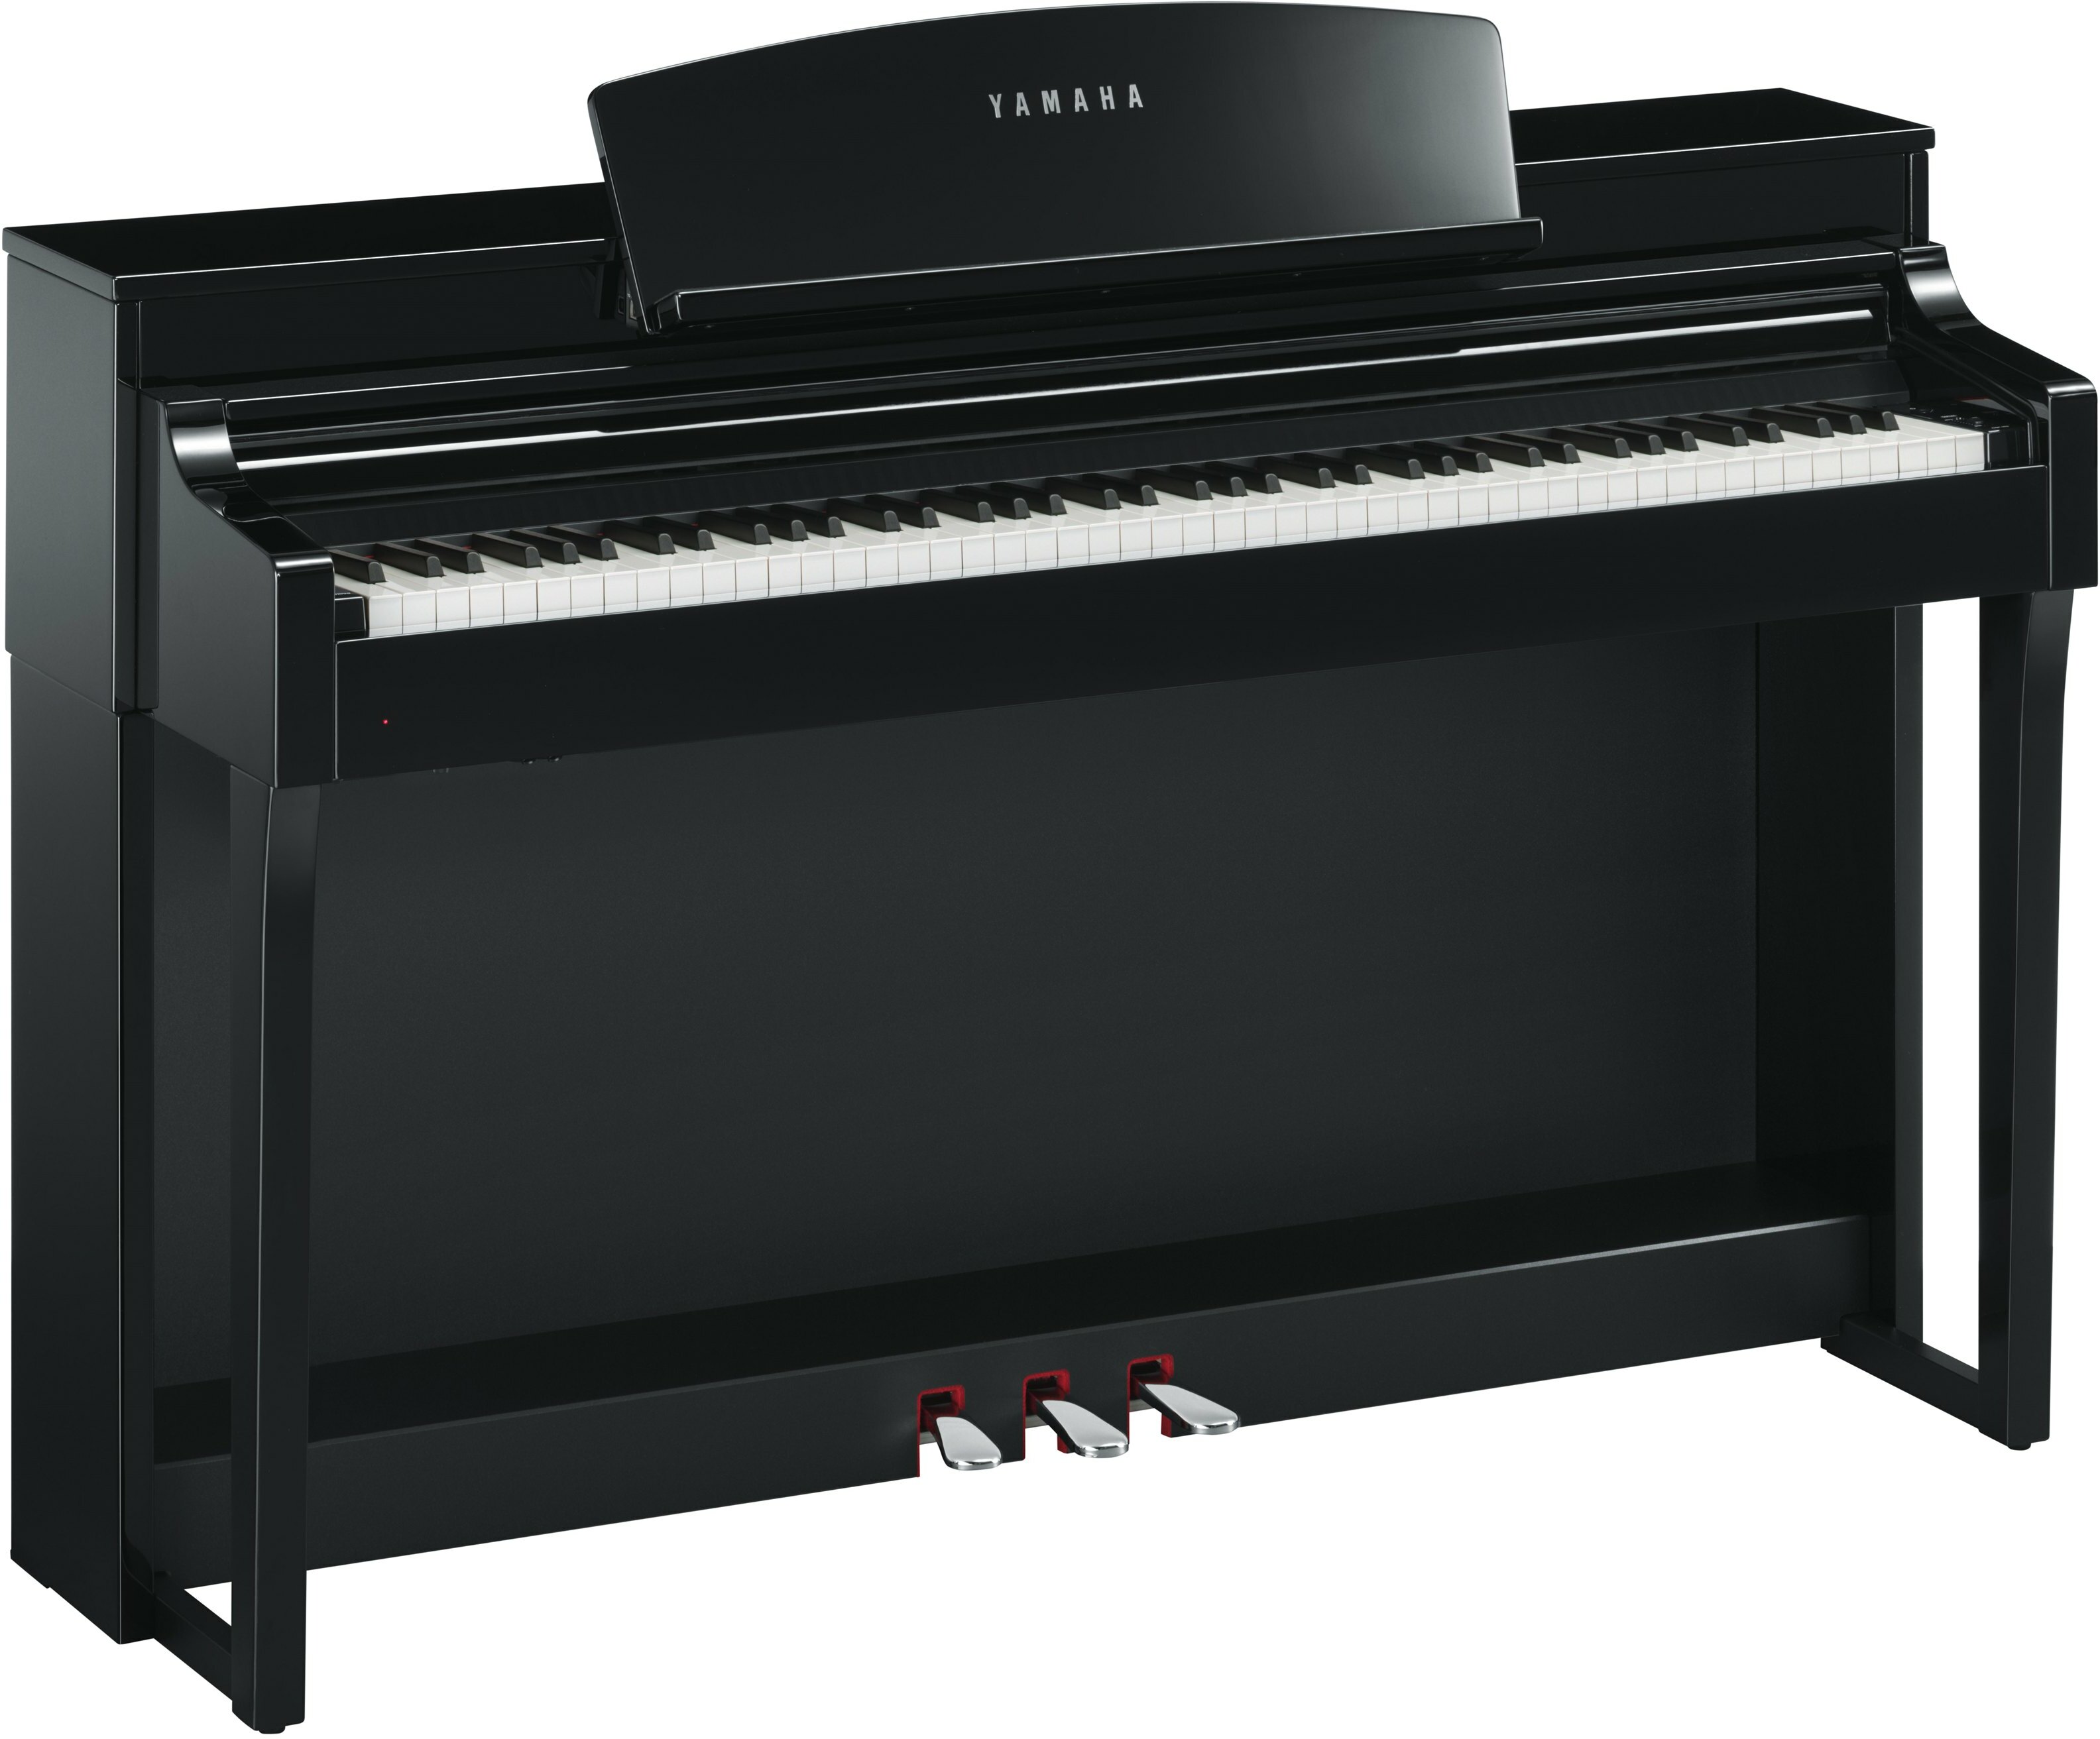 Yamaha Csp150 - Polished Ebony - Digital piano with stand - Main picture